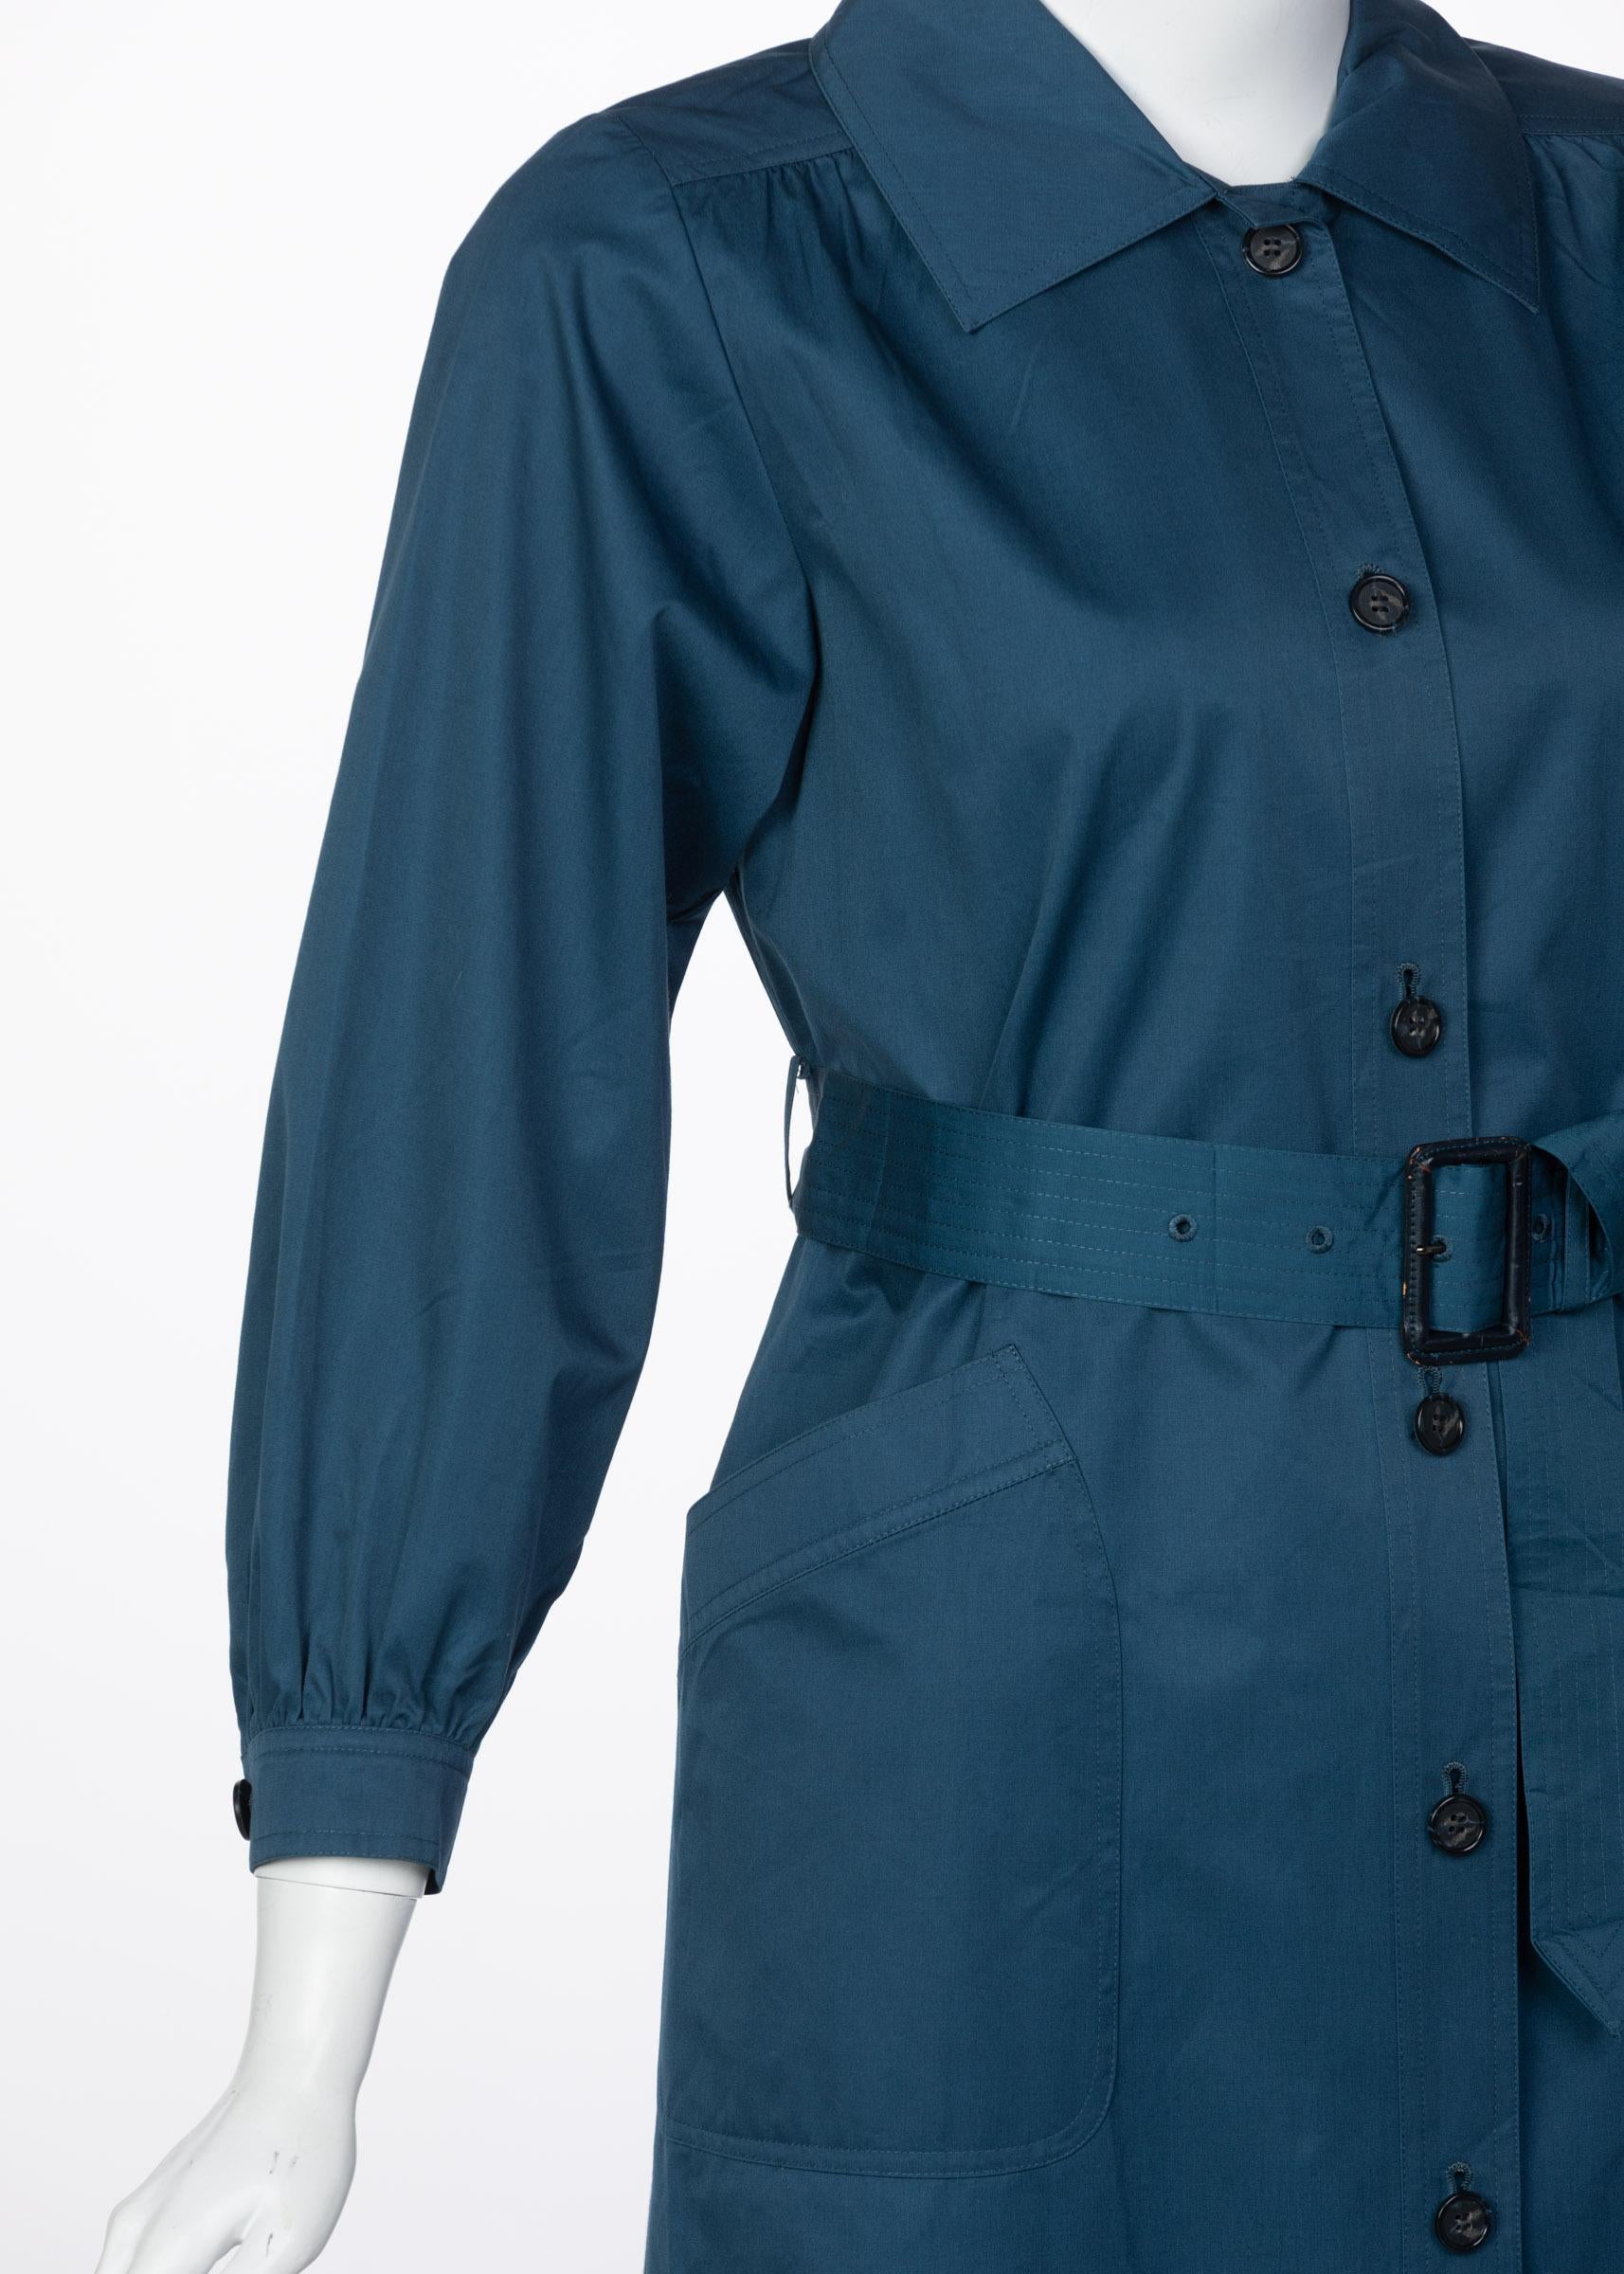 Yves Saint Laurent French Blue Belted Cotton Trench Coat YSL, 1970s For Sale 1